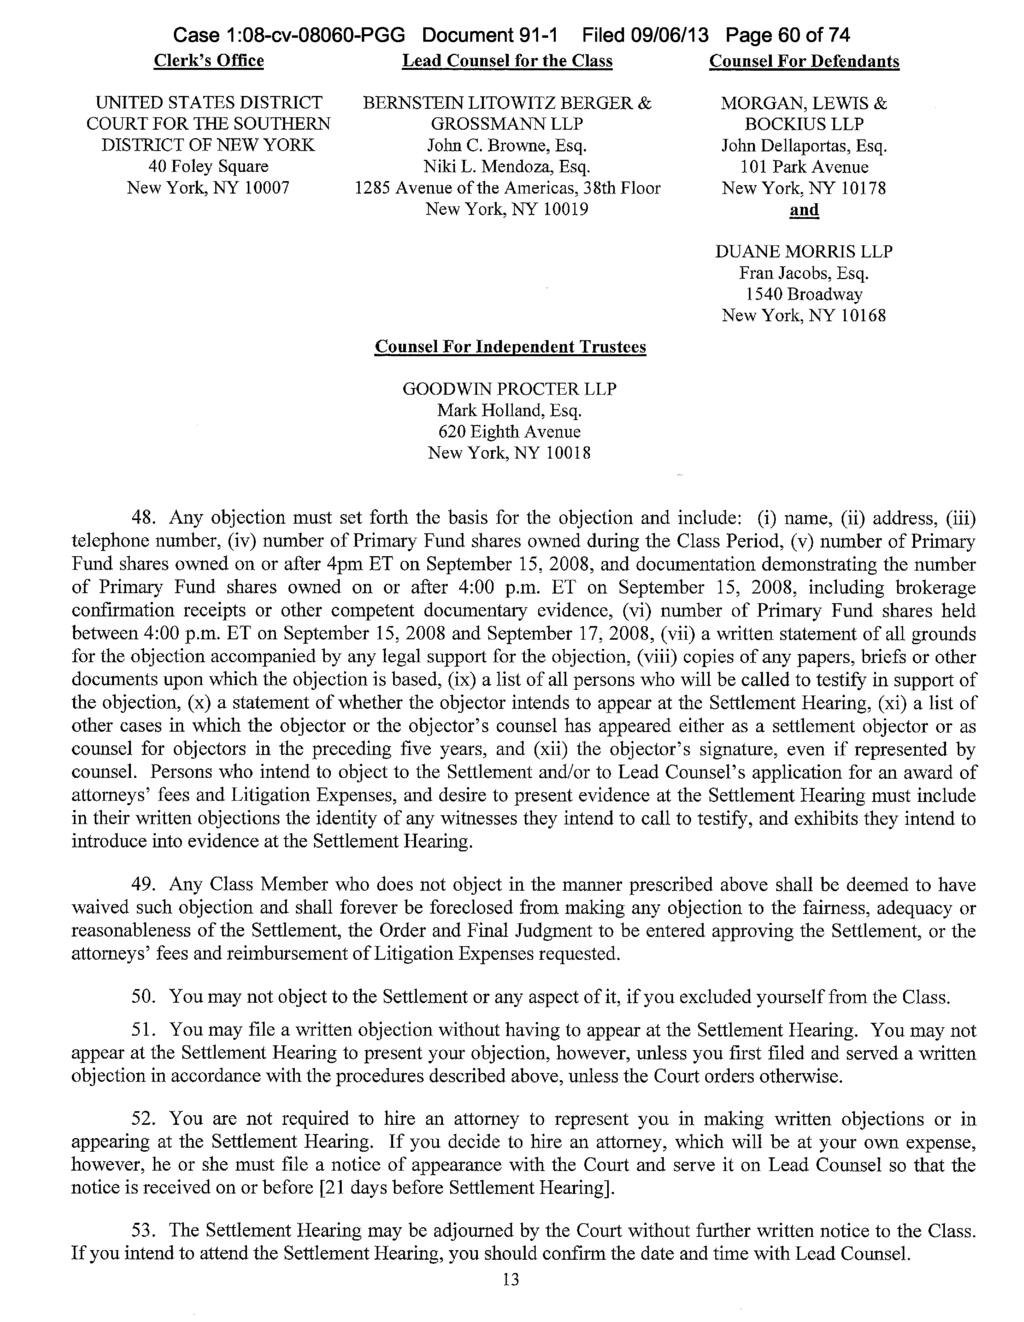 Case 1:08-cv-08060-PGG Document 91-1 Filed 09/06/13 Page 60 of 74 Clerk's Office Lead Counsel for the Class Counsel For Defendants UNITED STATES DISTRICT COURT FOR THE SOUTHERN DISTRICT OF NEW YORK